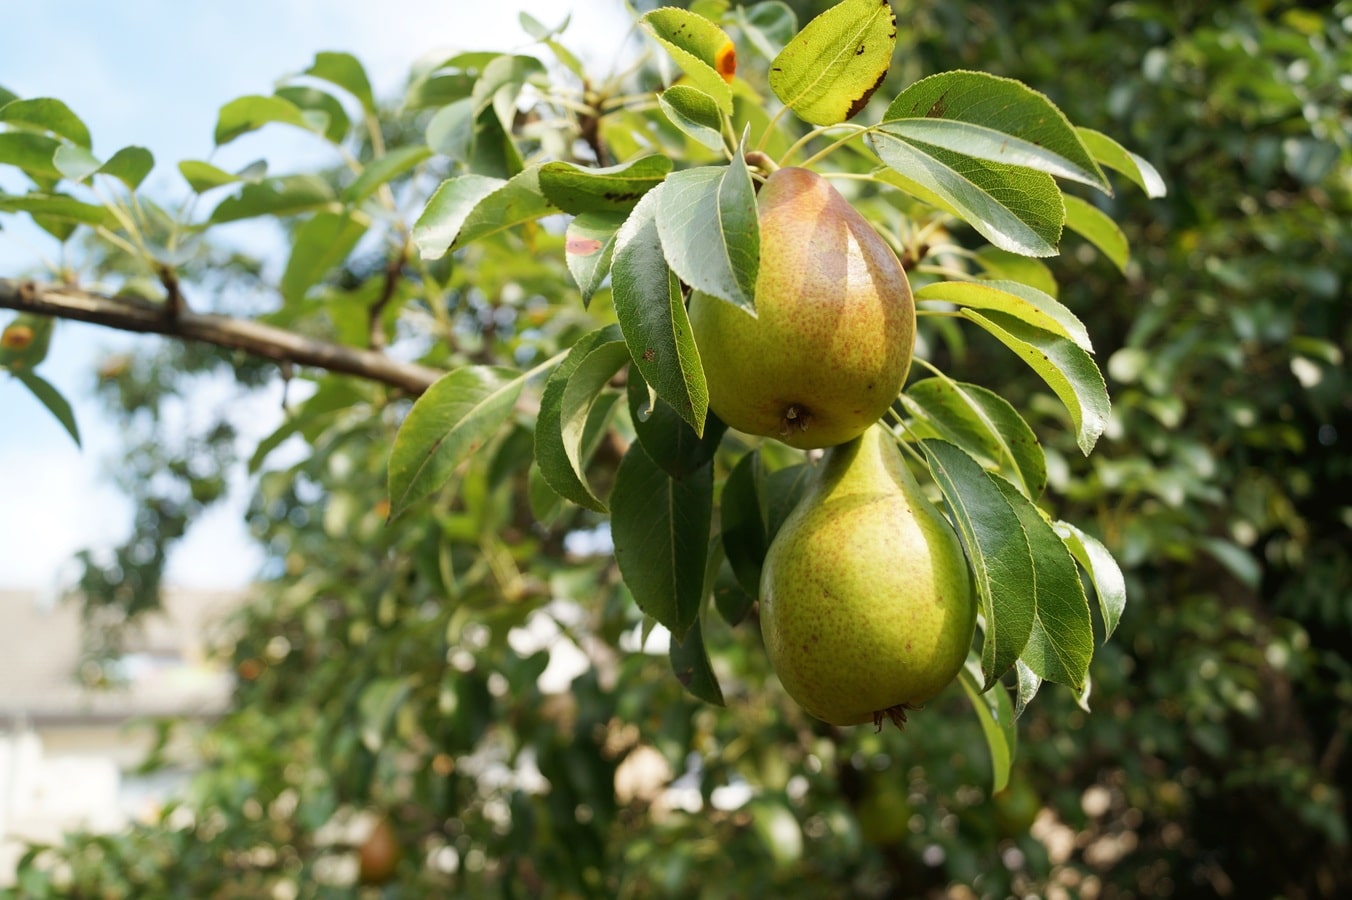 What are the pests of the pear tree and how to combat them?